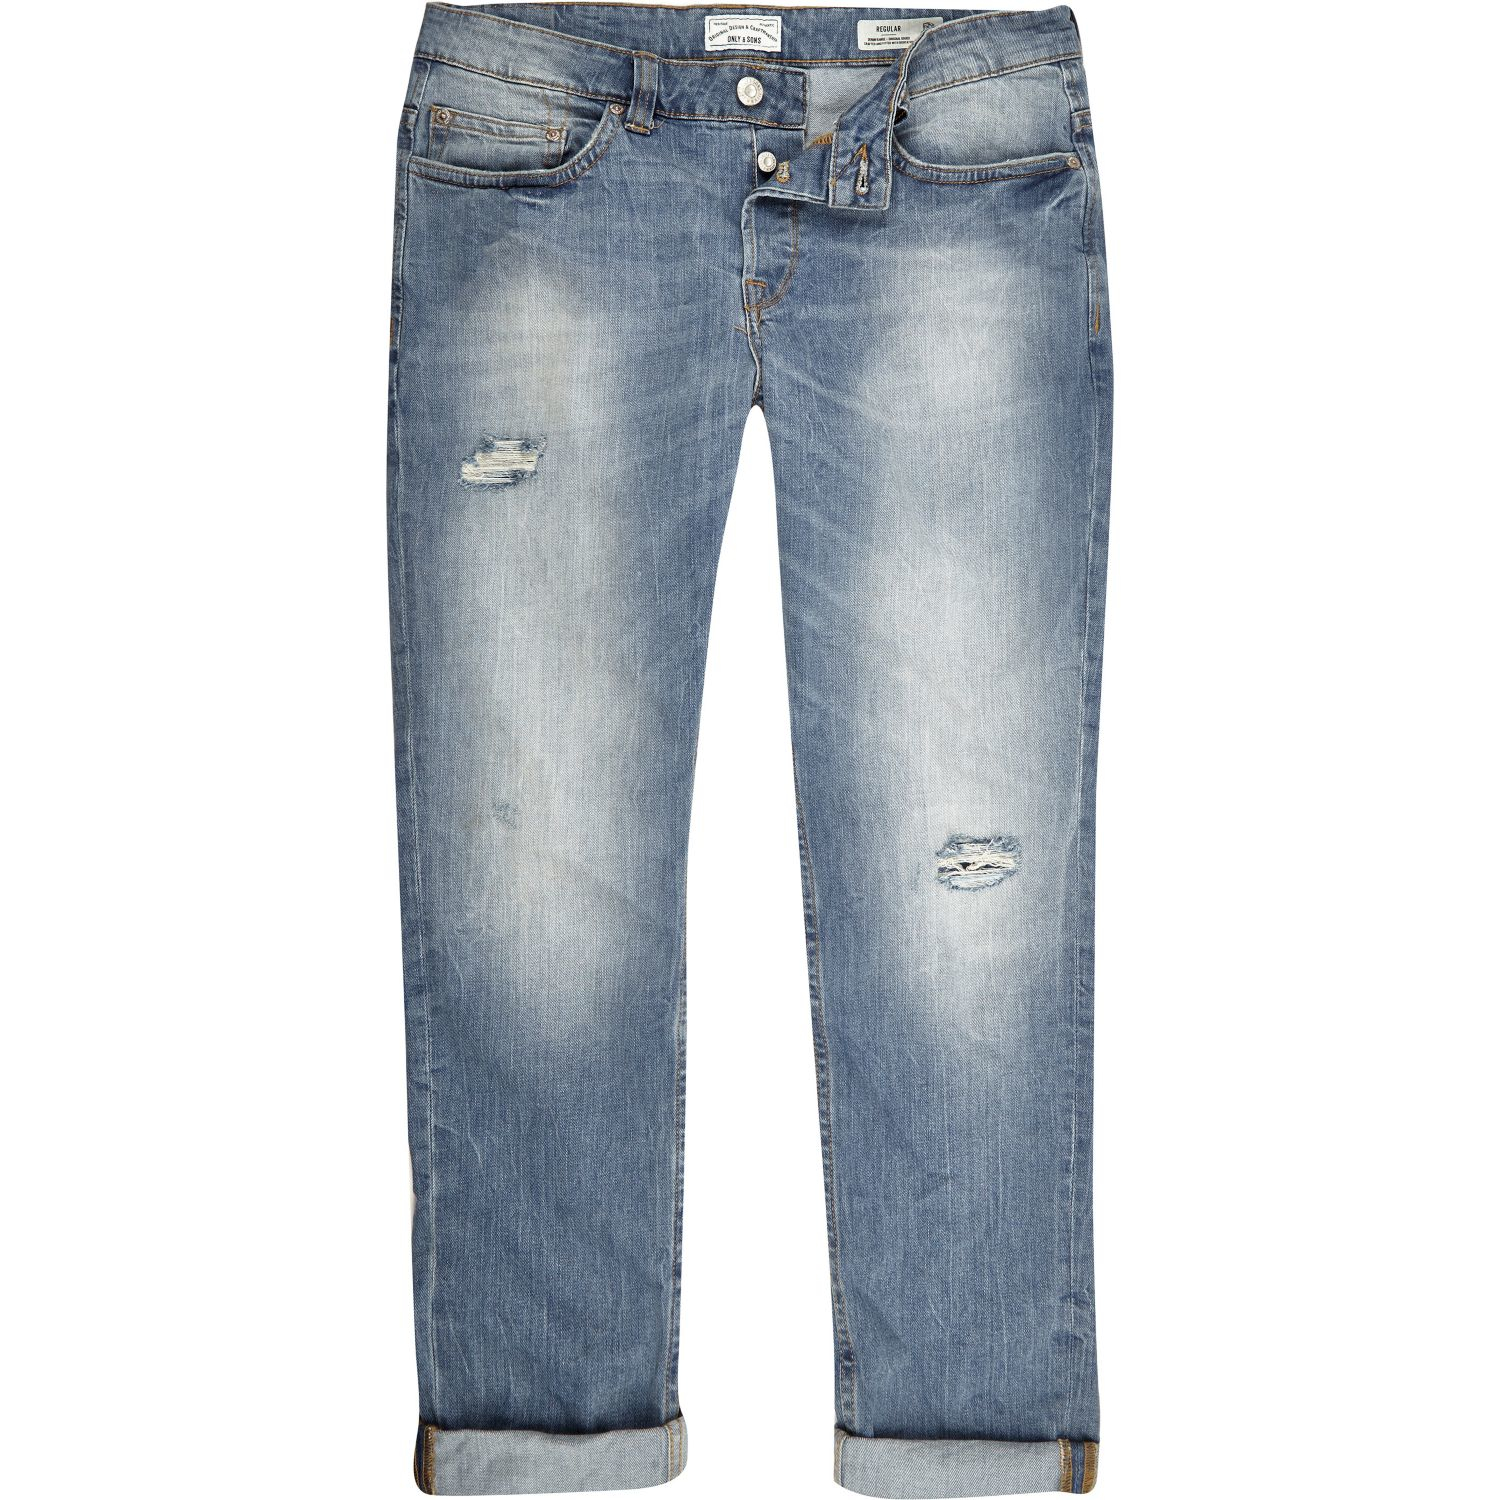 Lyst - River Island Skinny Vinny Jeans with Rips in Blue for Men